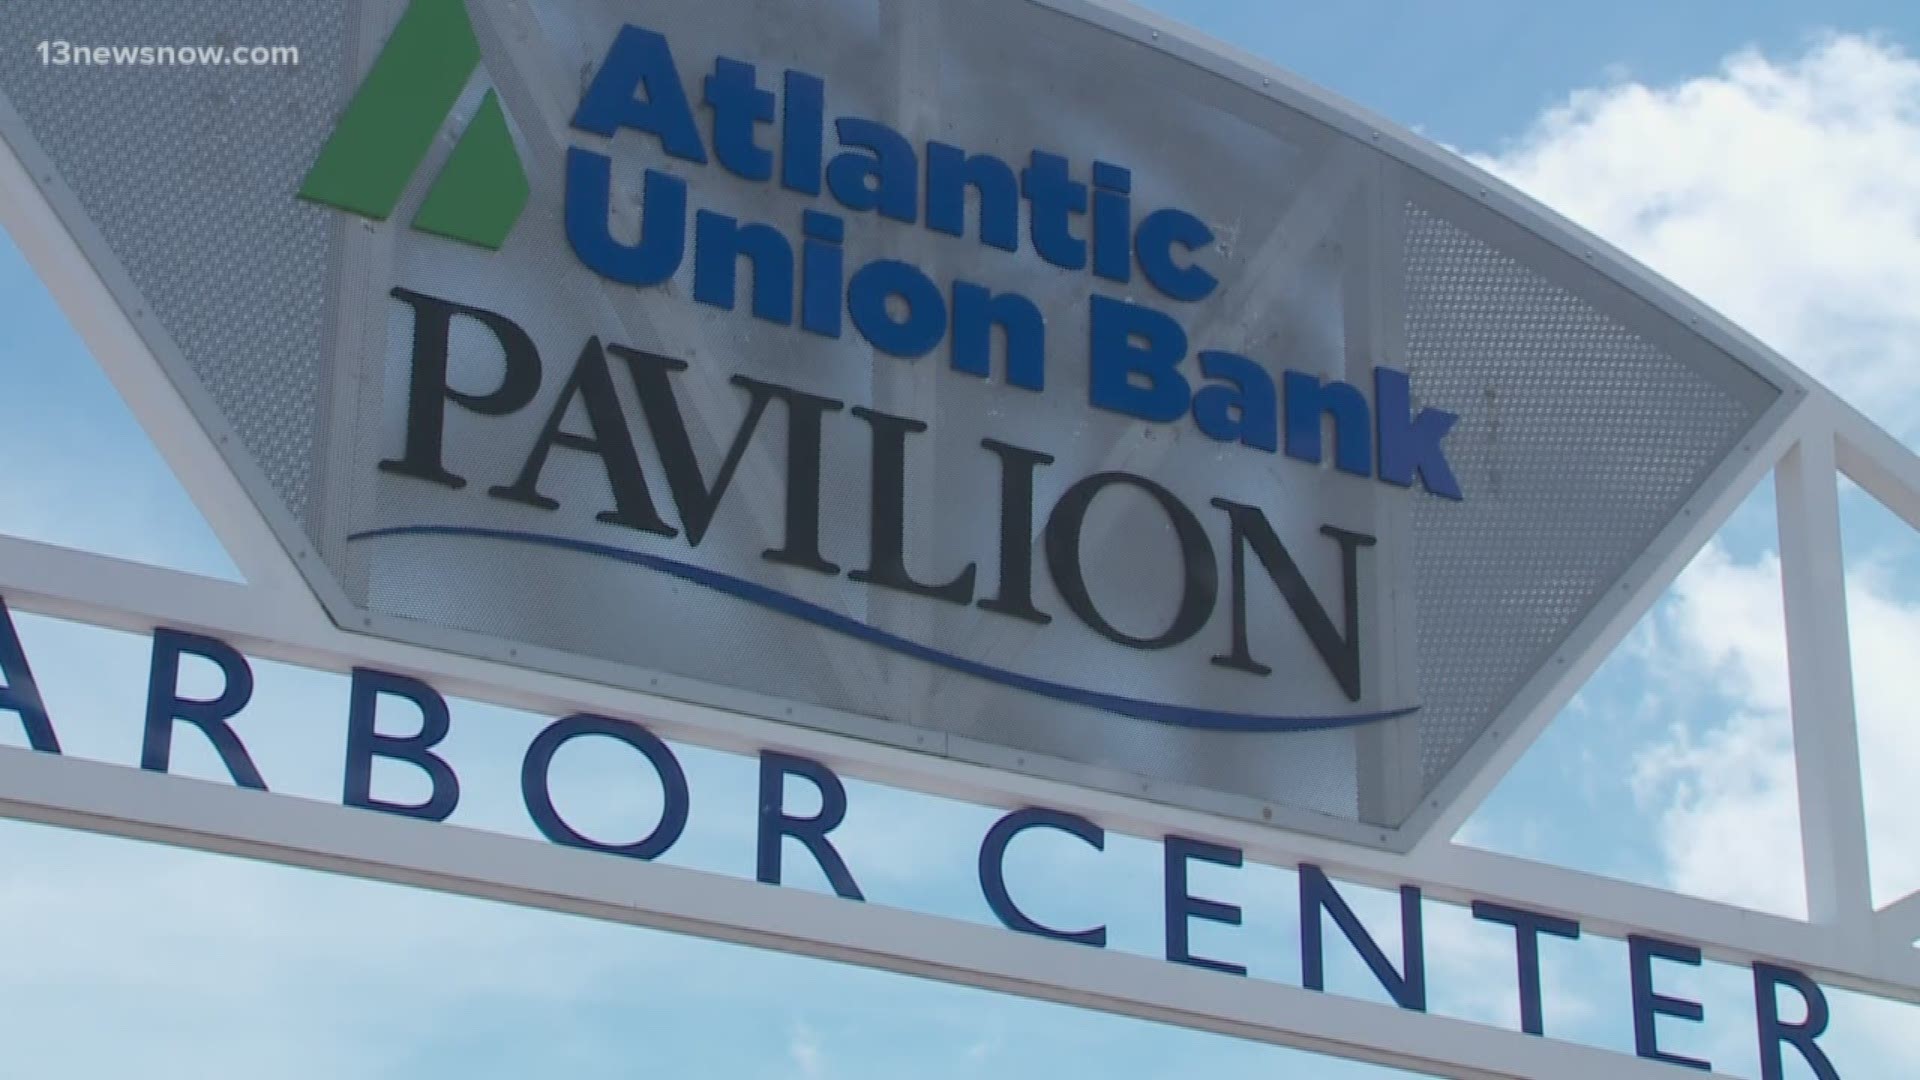 The Portsmouth Pavilion is going to be closed for the entire summer and businesses fear the lack of concert crowds could hurt them financially.